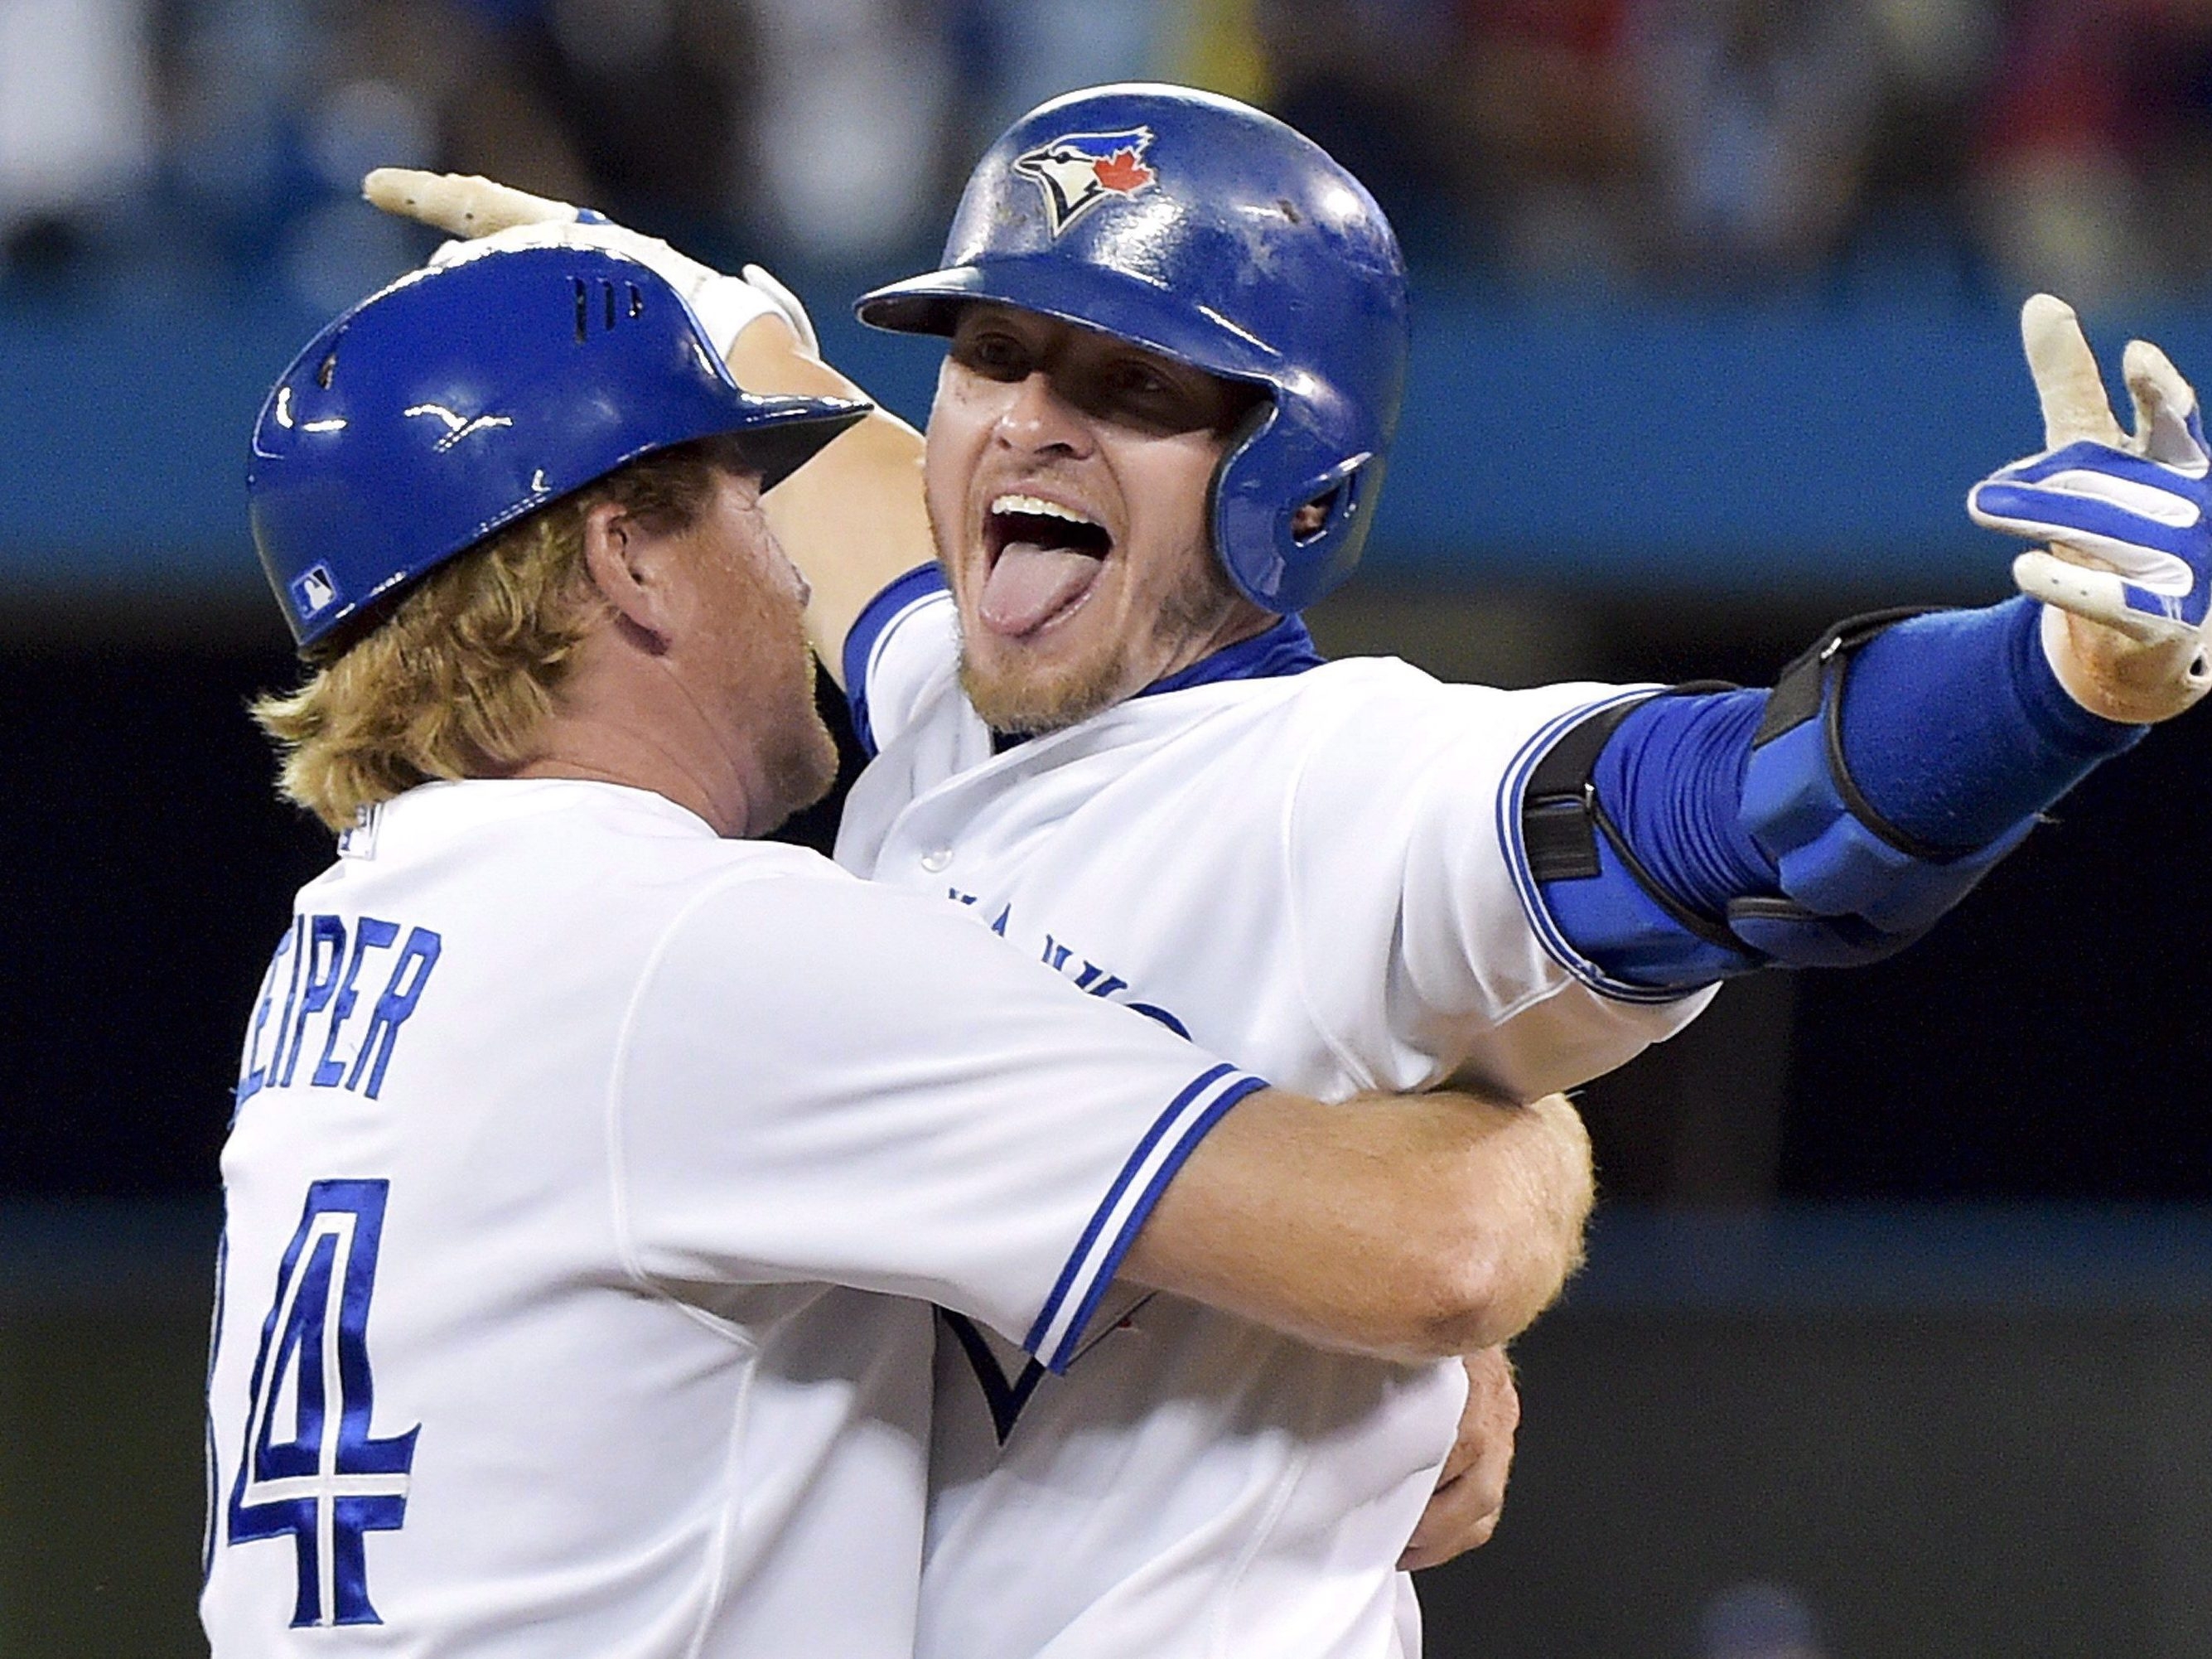 SIMMONS: The end of Josh Donaldson, one of the greatest Blue Jays